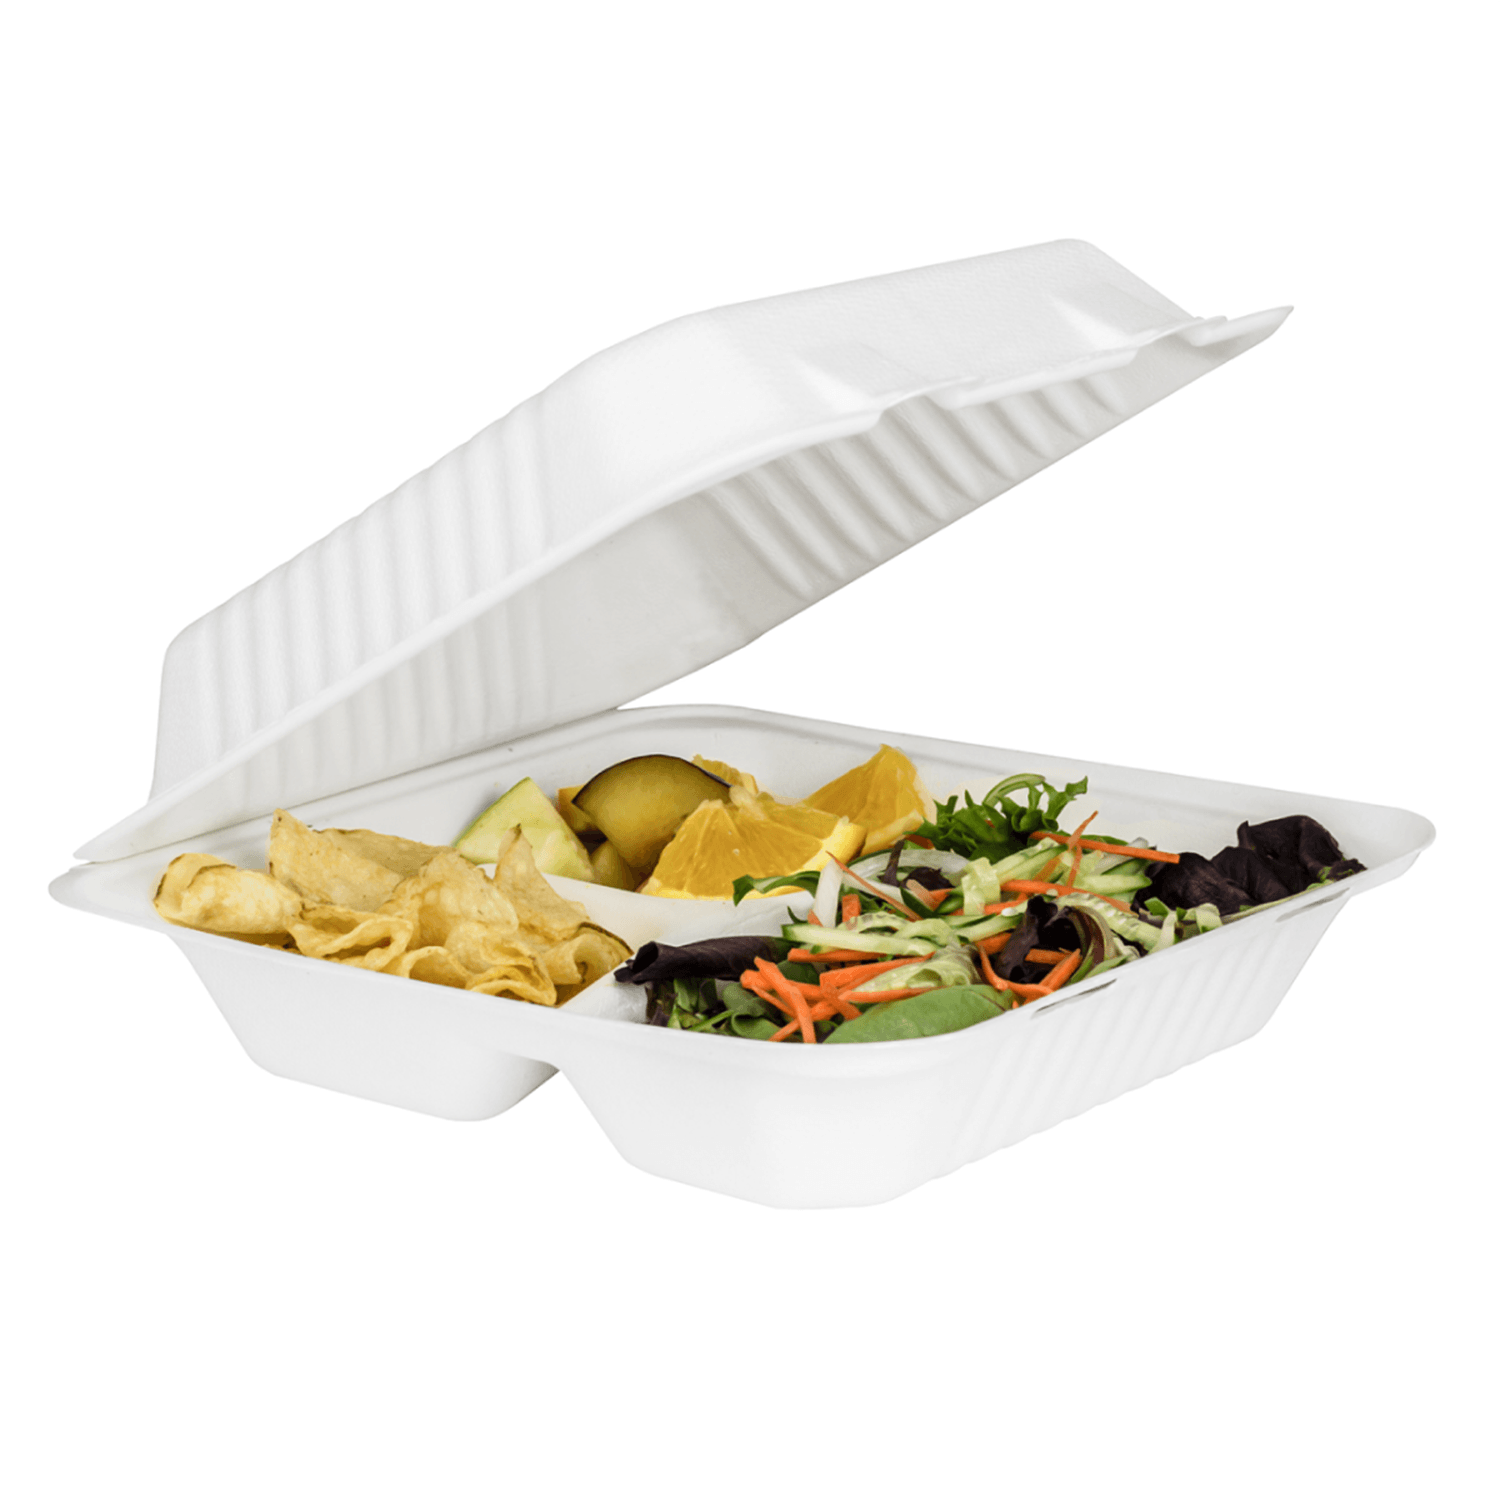 Karat Earth 9"x9" PFAS Free Compostable Bagasse Hinged Container, White, 3 Compartments - 200 pcs